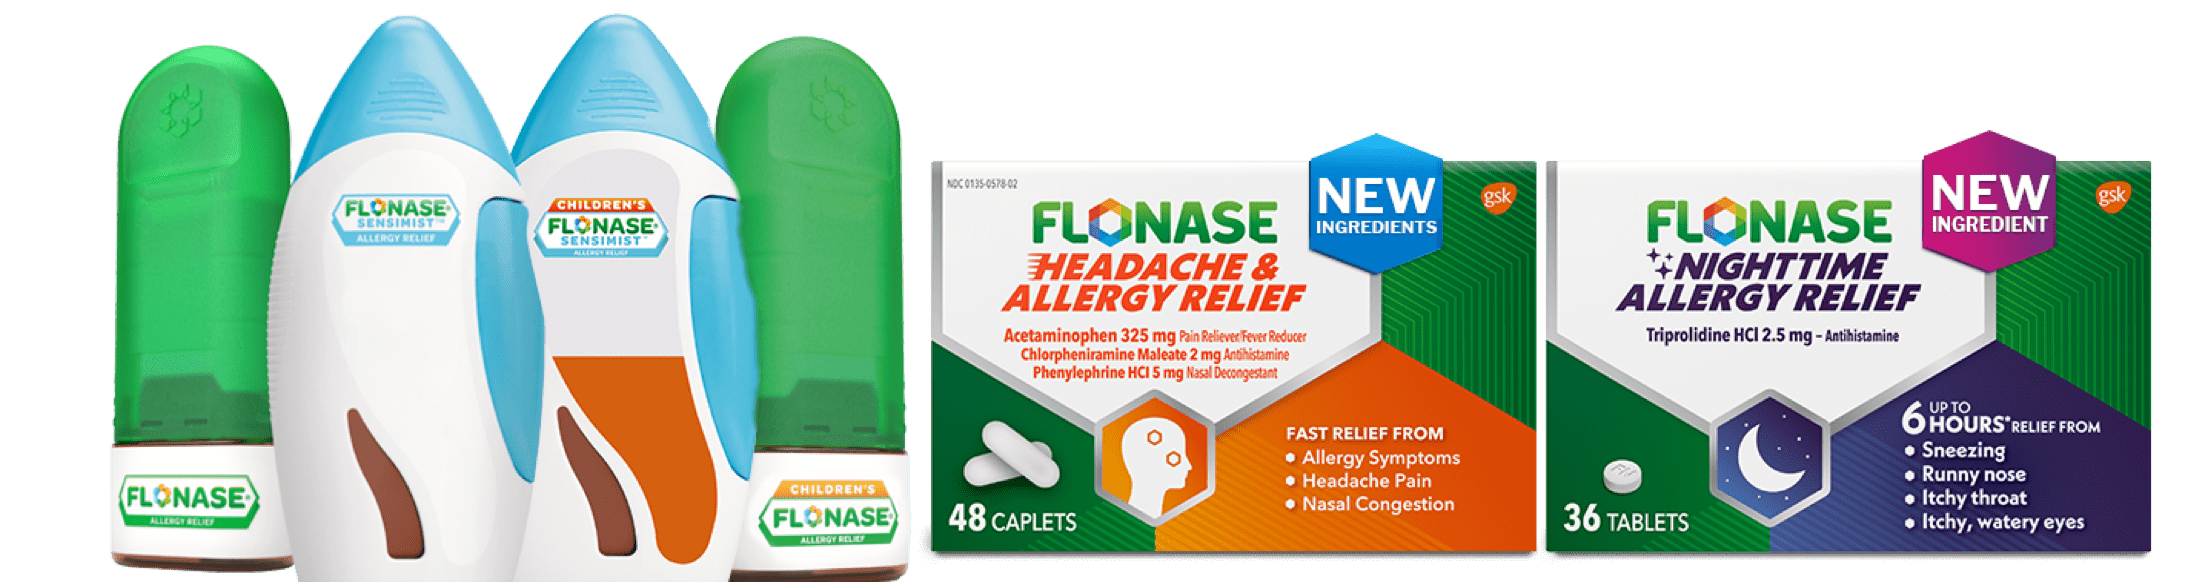 FLONASE allergy relief products for headache and allergy relief for adults and children